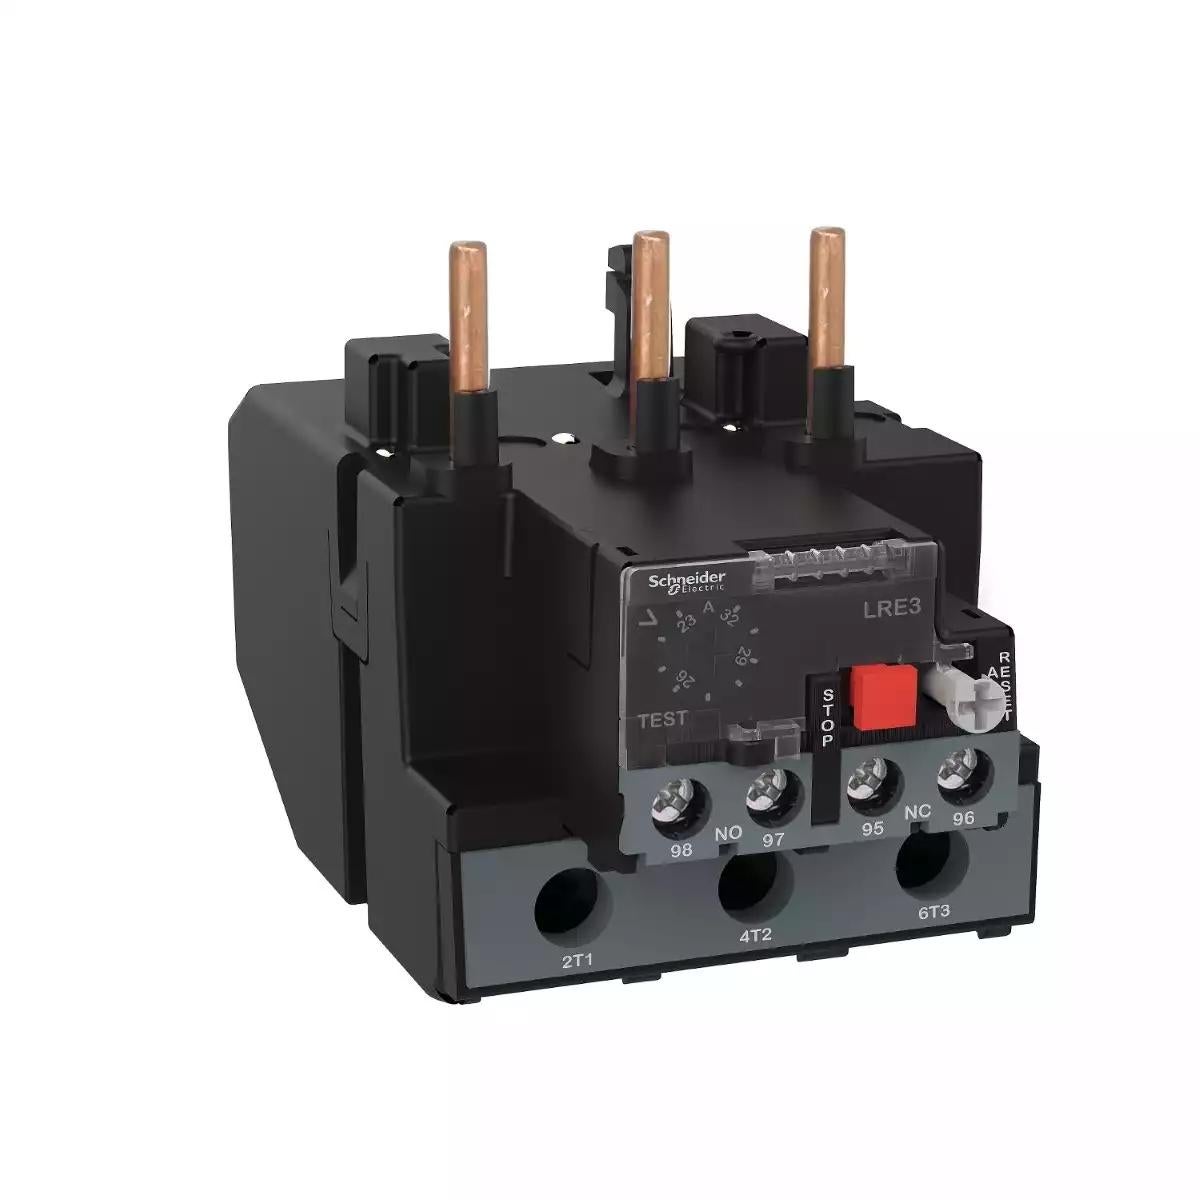 TVS THERMAL OVERLOAD RELAY 30...40A